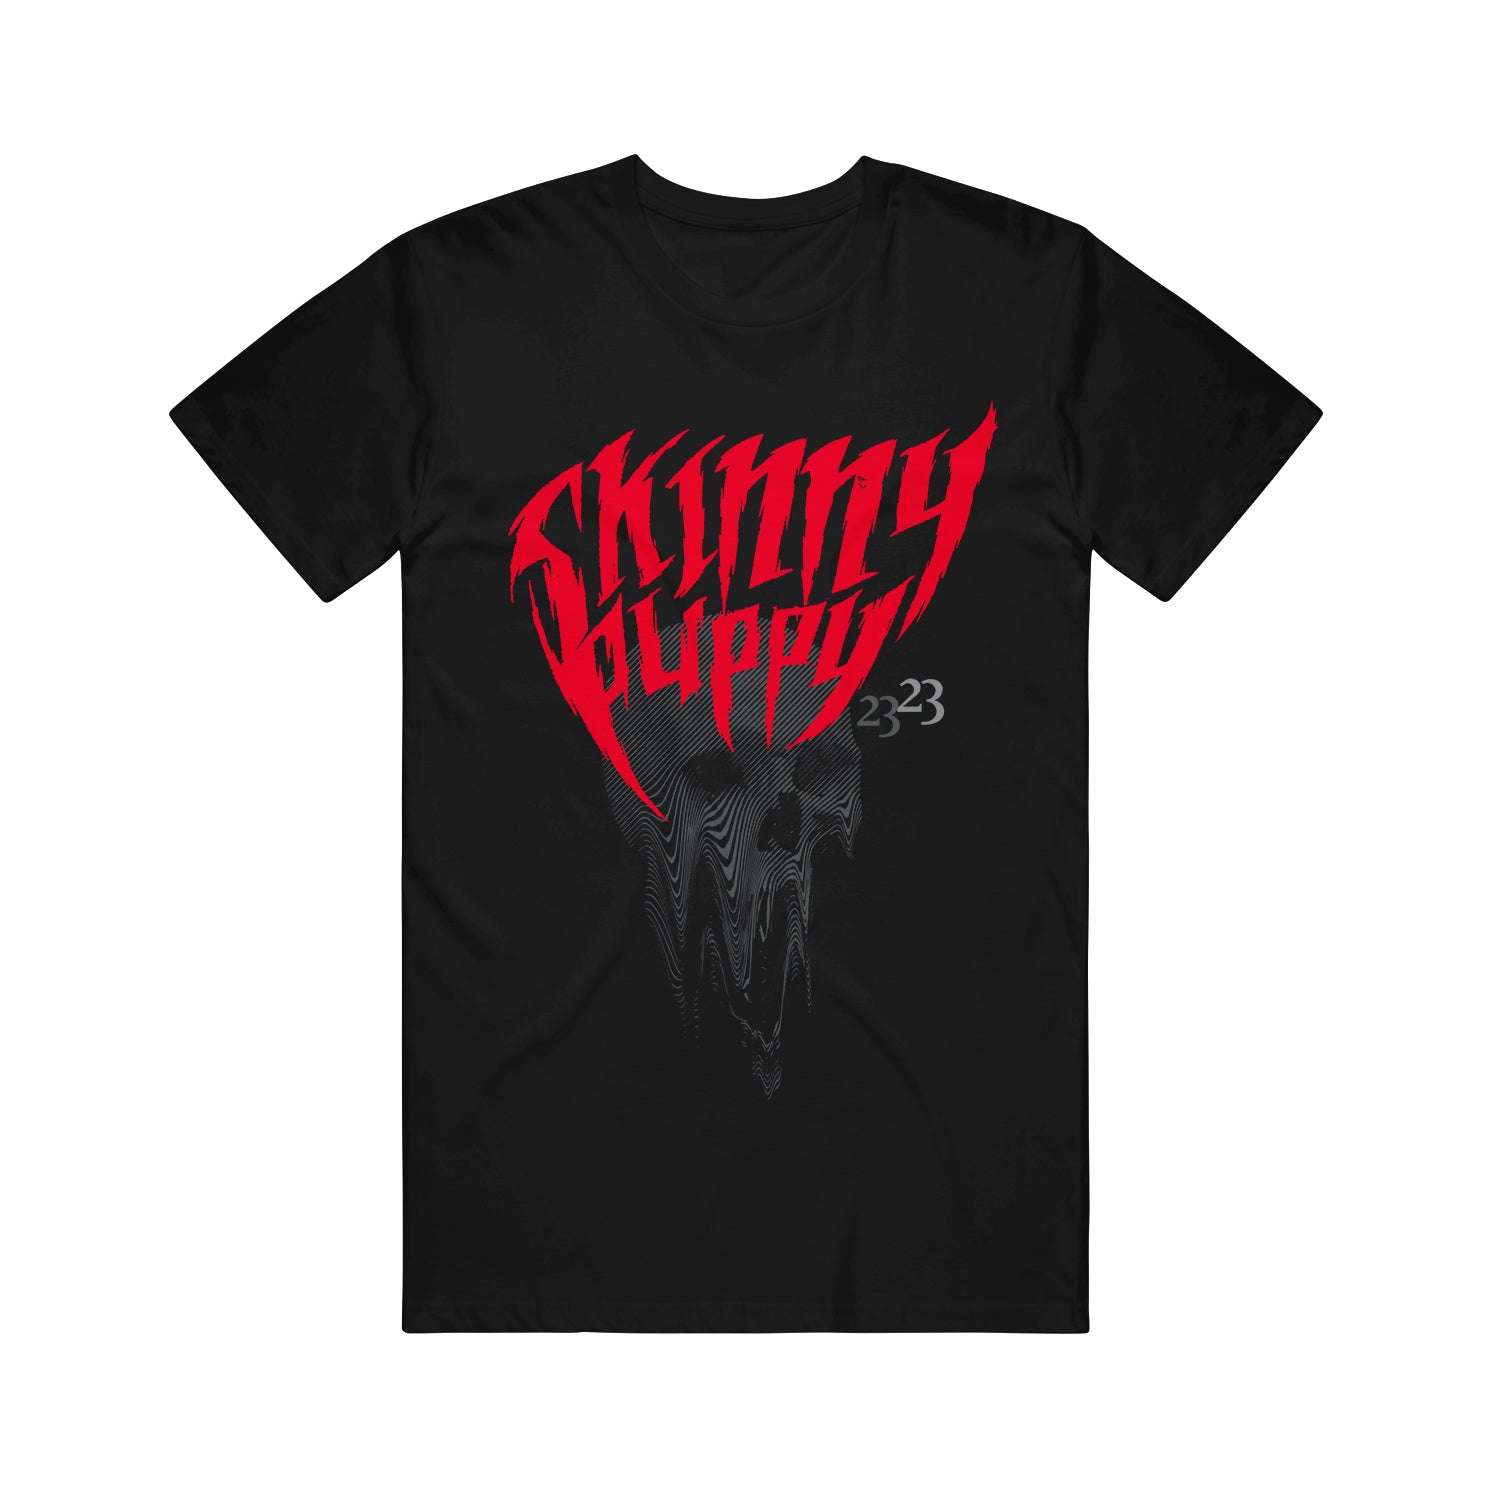 black tshirt on a white background. The shirt says Skinny Puppy in red letters and below that is a grey skull that is dripping by the mouth. Next to that are the numbers 23, 23 in grey.